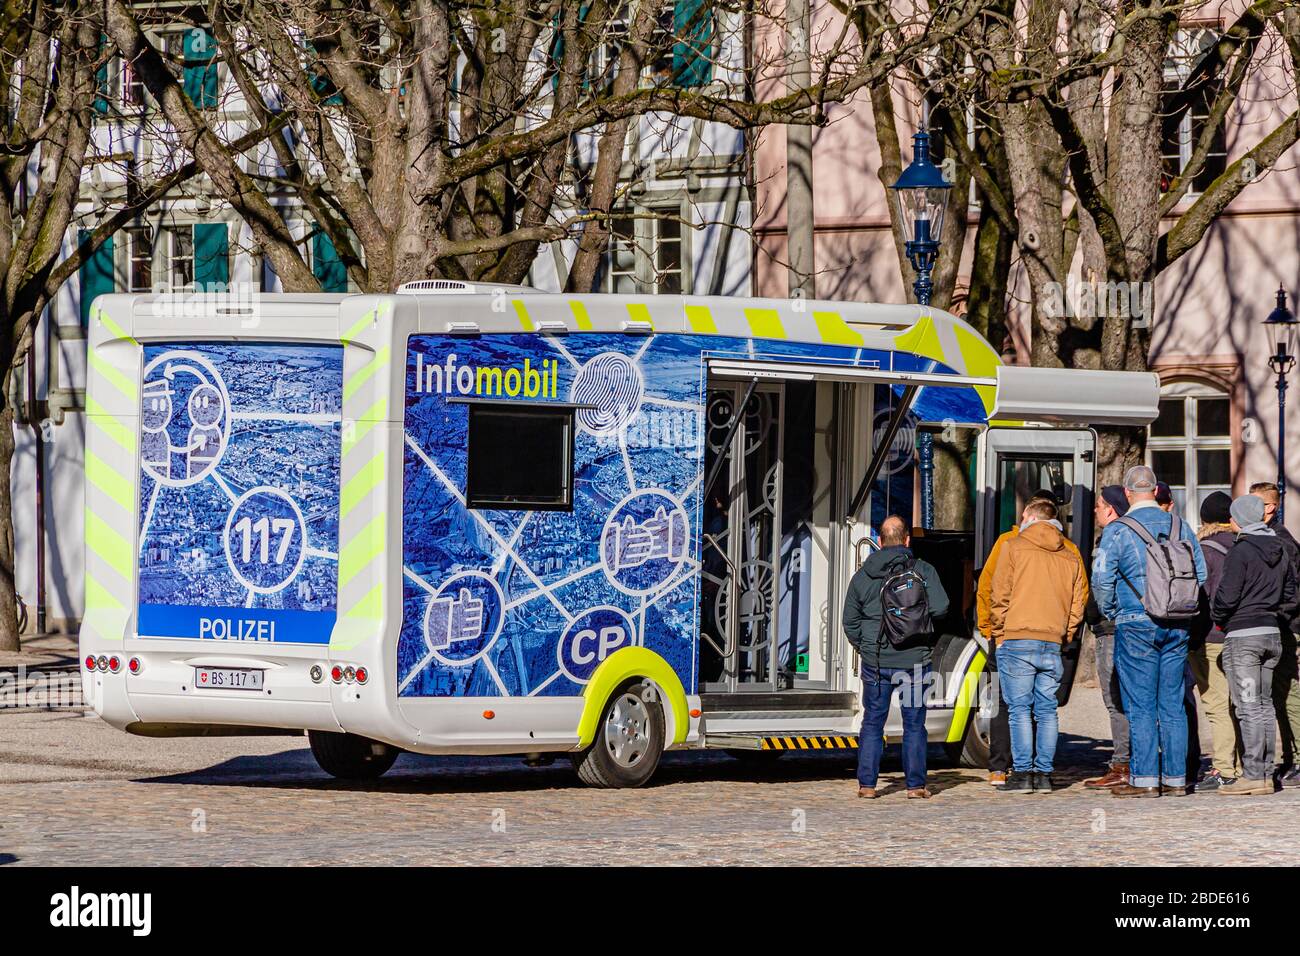 A police community information vehicle with a crowd outside it in the city centre of Basel, Switzerland. February 2020. Stock Photo